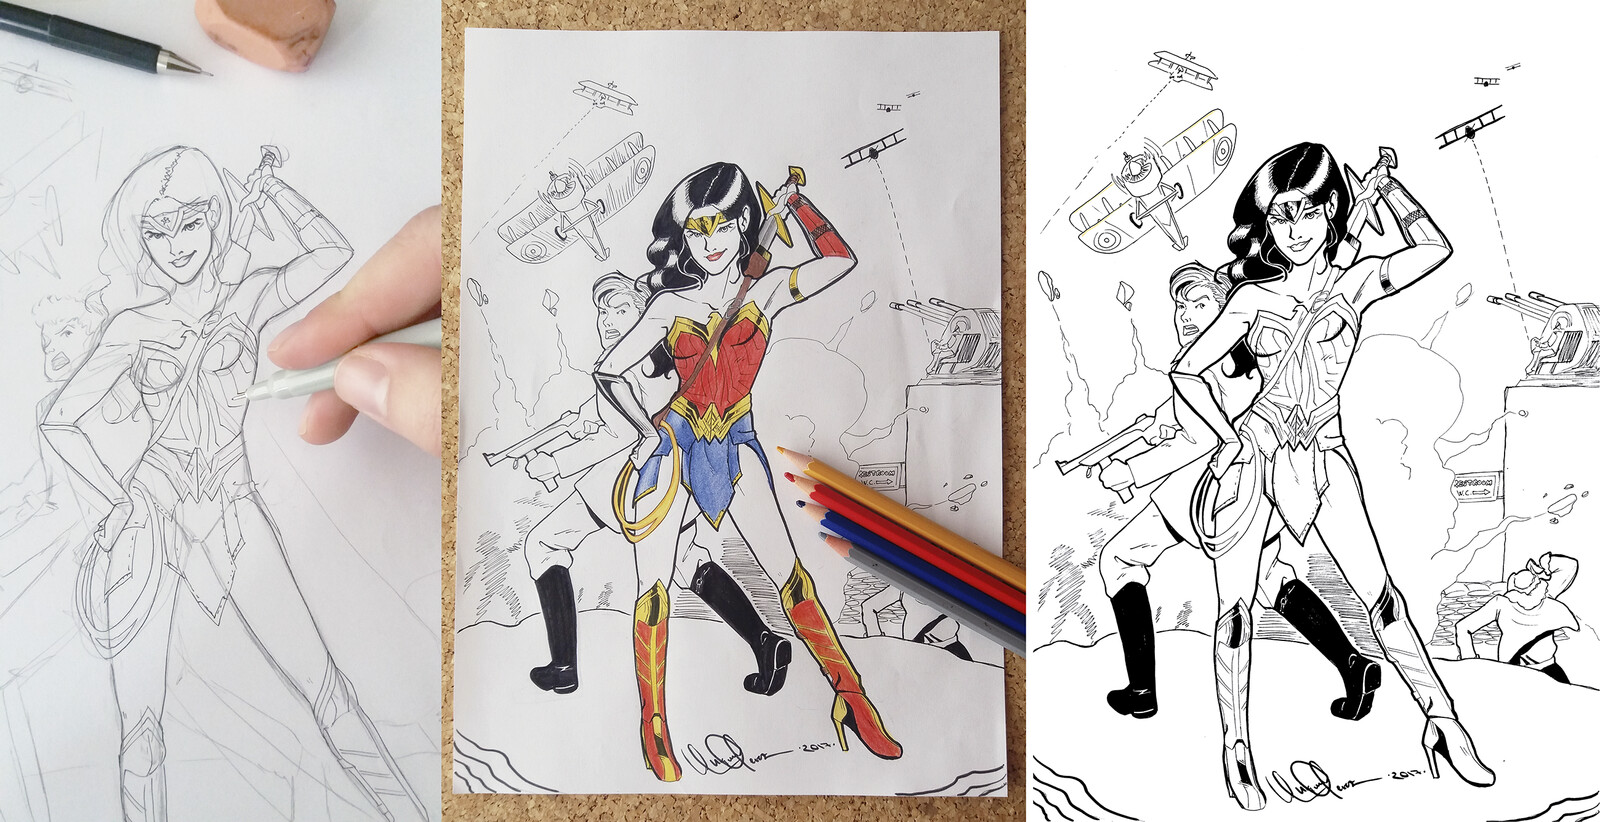 Wonder Woman's "I got this" process drawings and photographs 2018